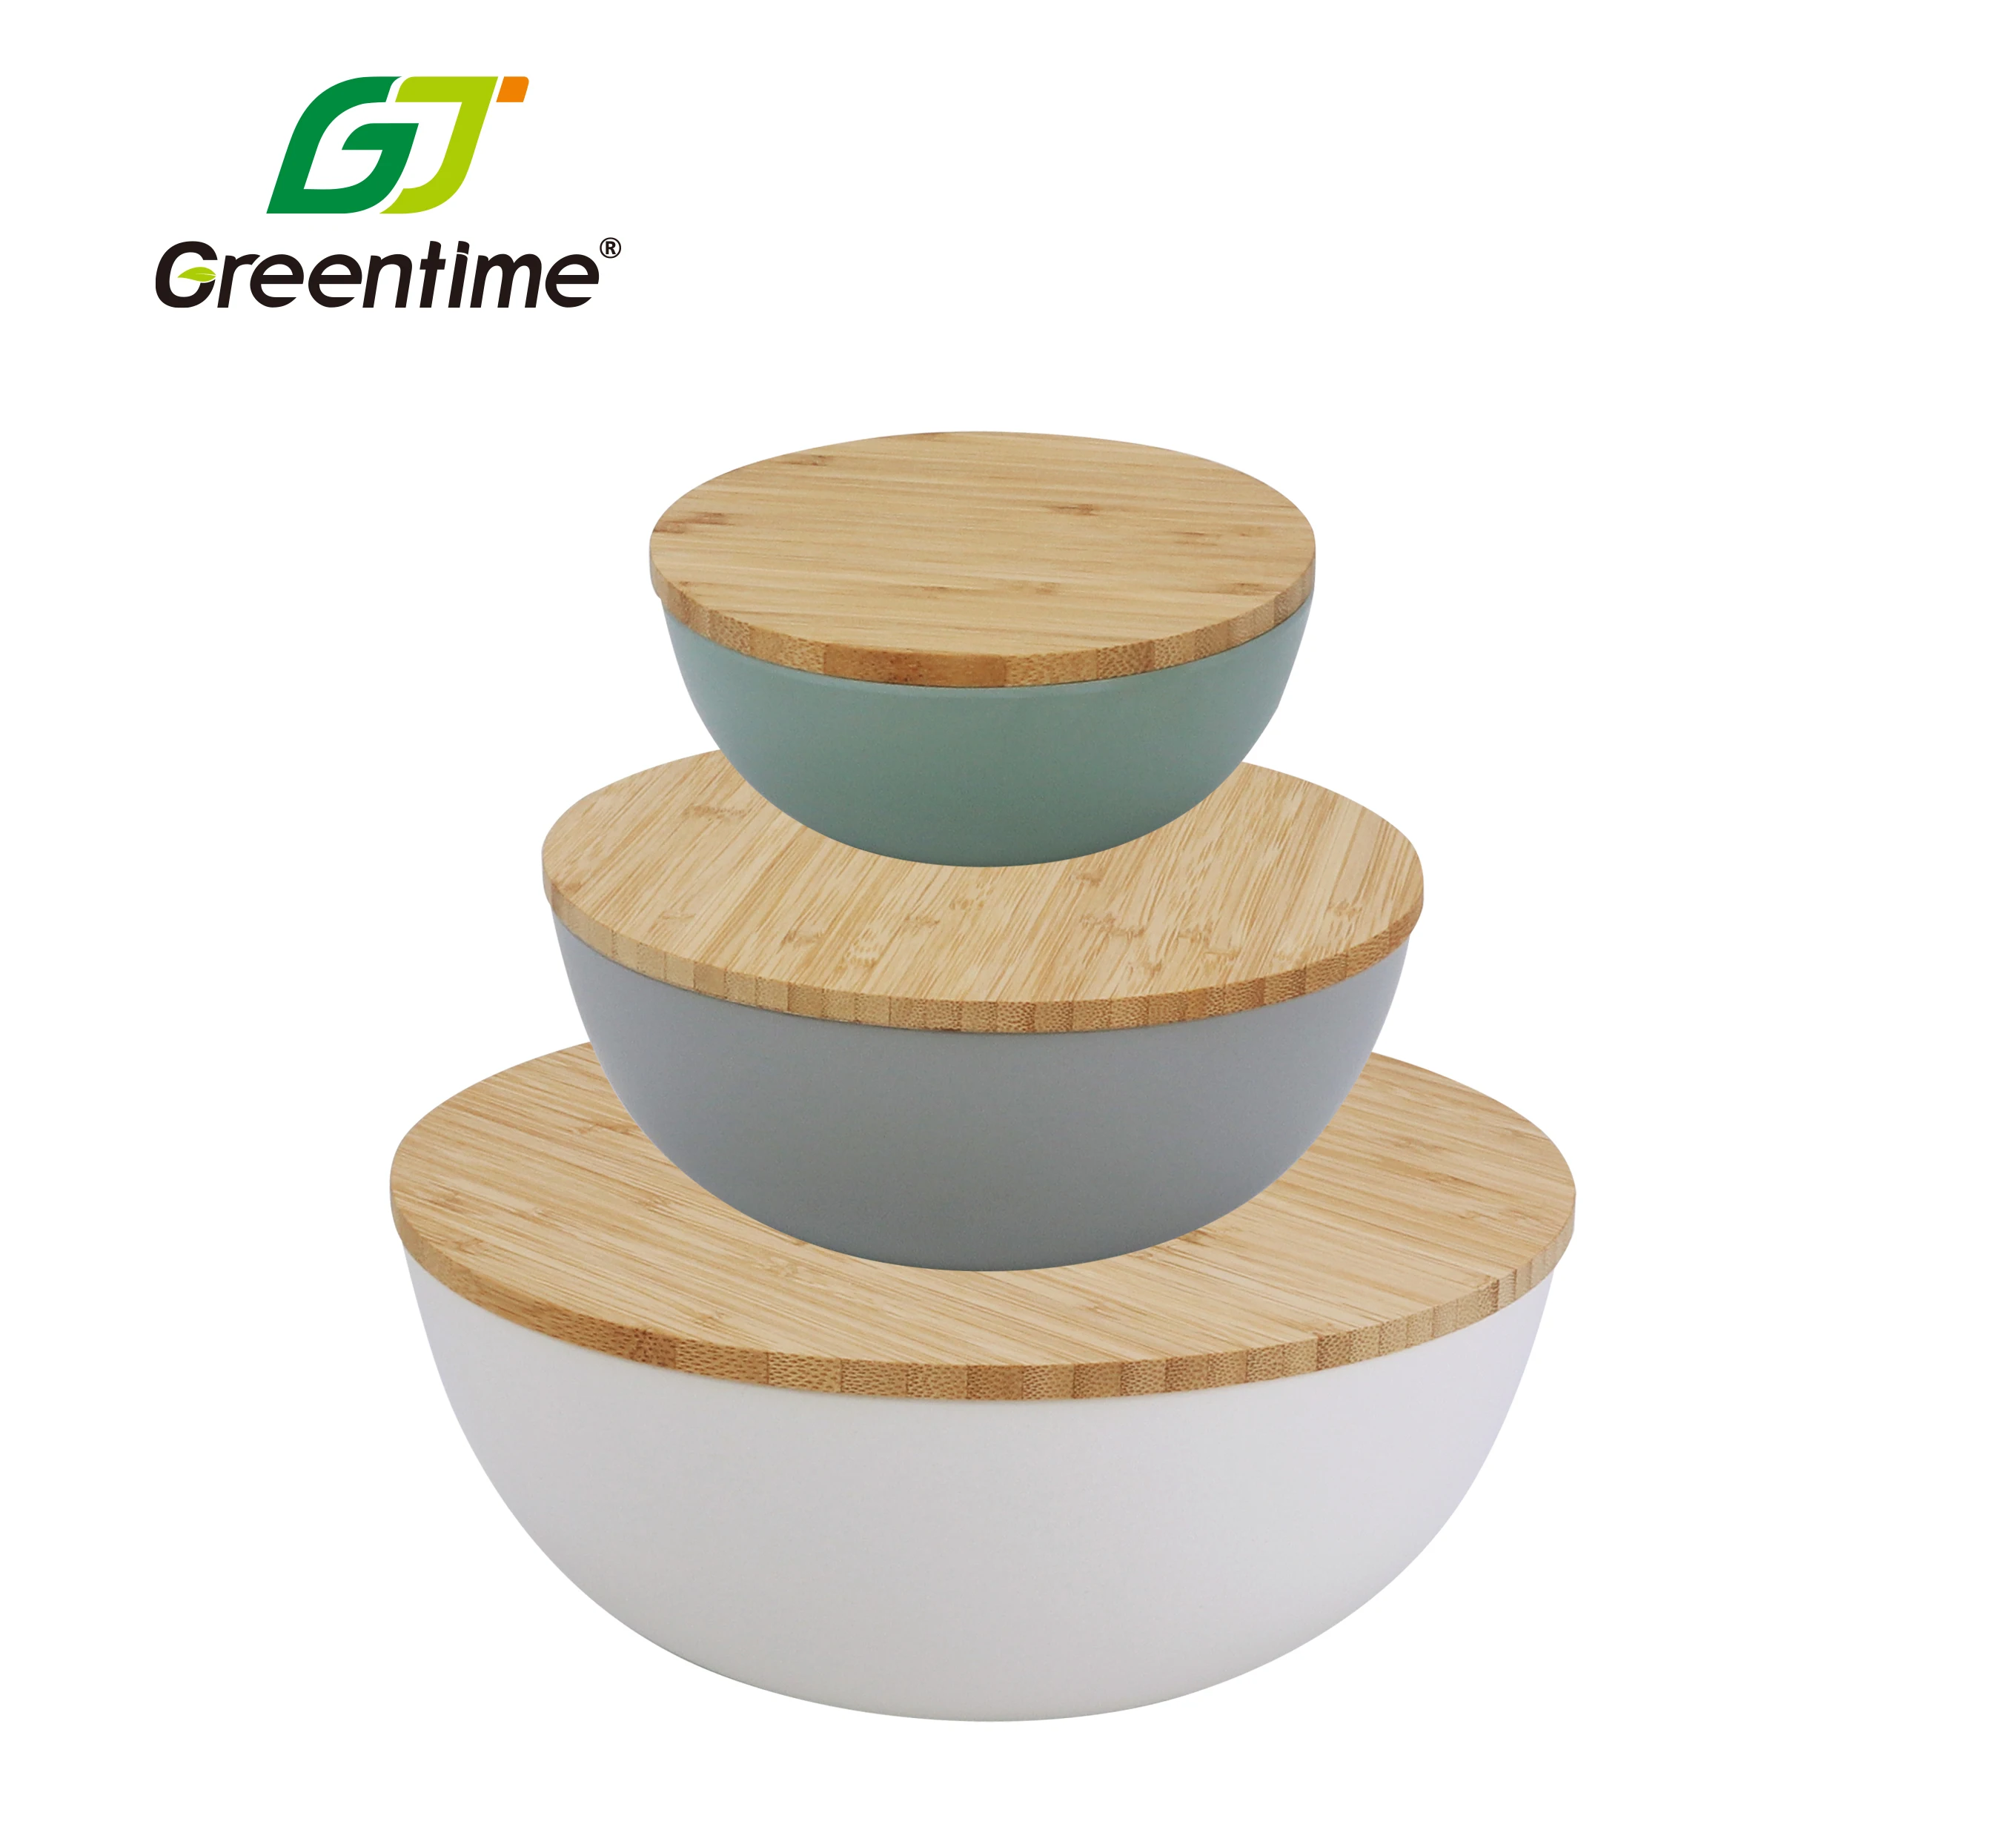 

Wholesale Eco-friendly Customized Bamboo Fiber Round Serving Bowl, Salad Bowl Set With Bamboo Lid